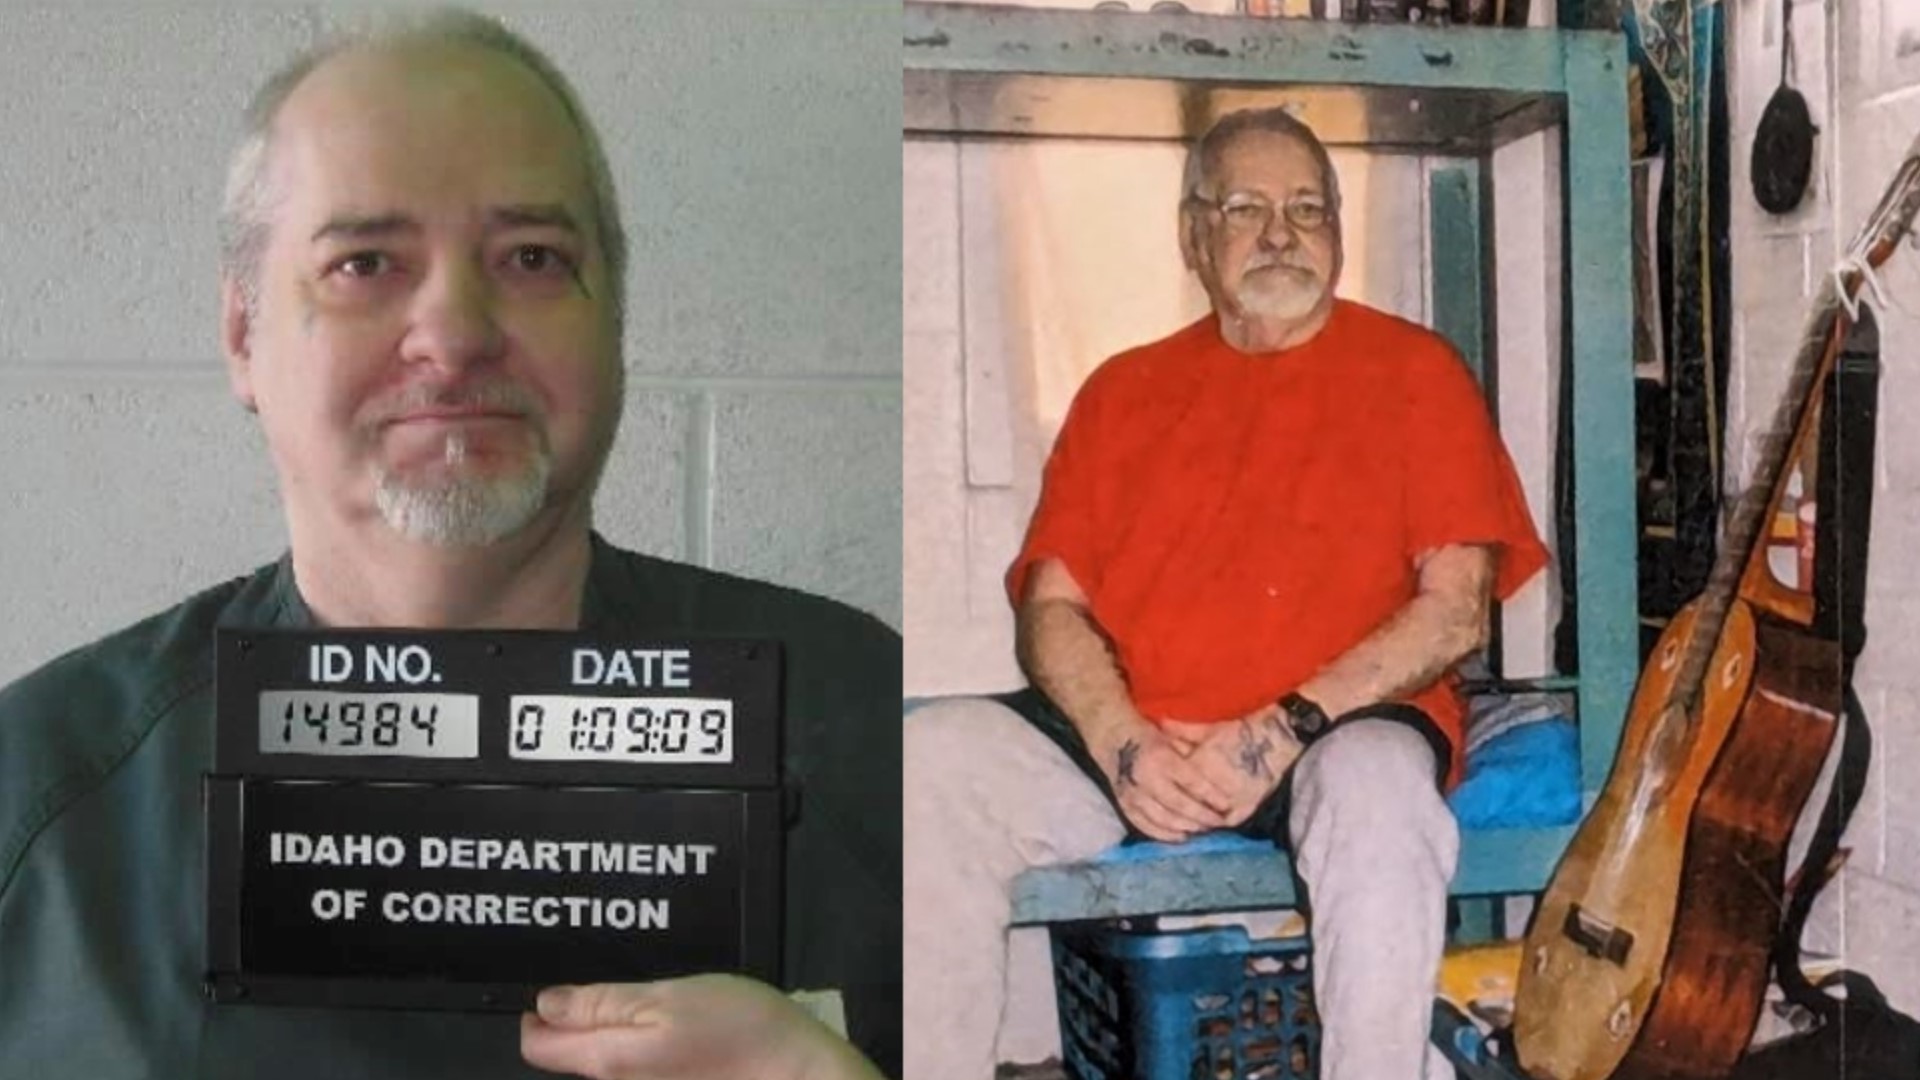 Idaho's longest standing death row inmate was set to be executed on Wednesday. Creech's death warrant will expire as a result of the unsuccessful lethal injection.